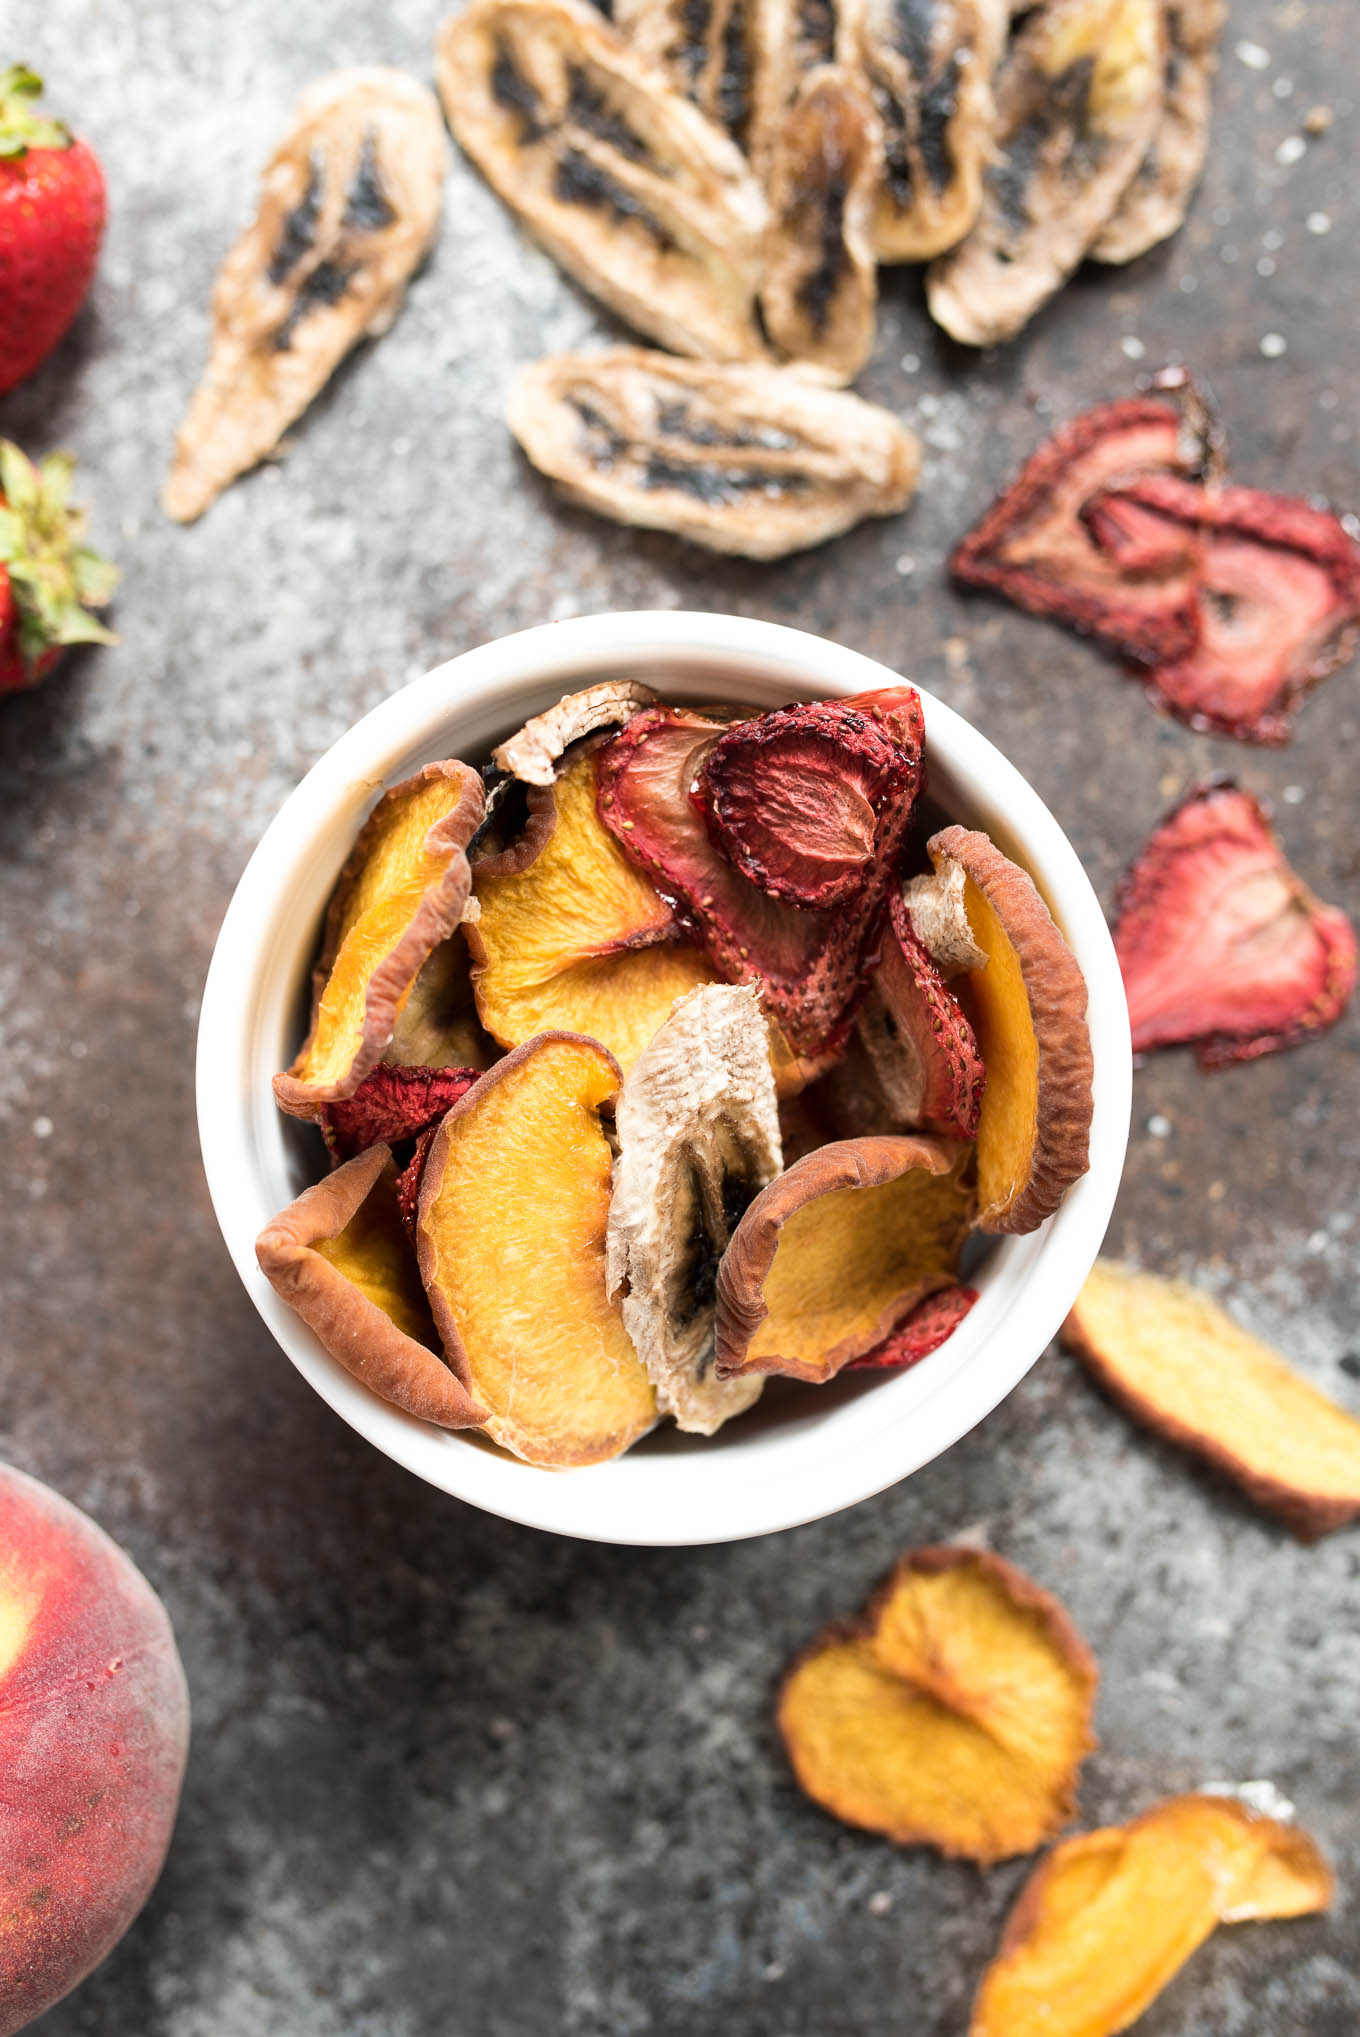 Simple-Homemade-Dried-Fruit-7